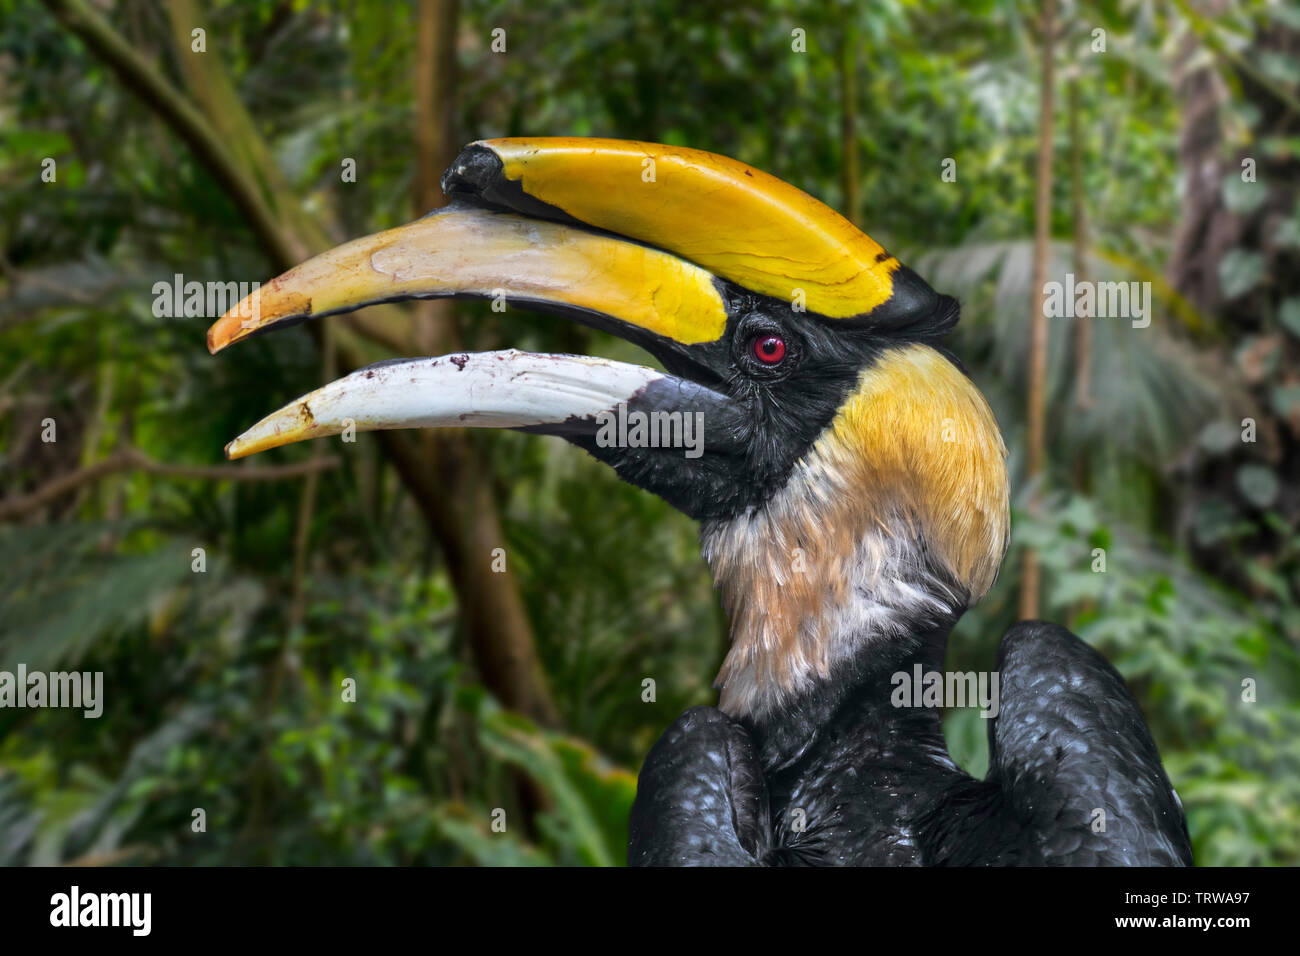 Great hornbill / great Indian hornbill / great pied hornbill (Buceros bicornis) native to the Indian subcontinent and Southeast Asia Stock Photo